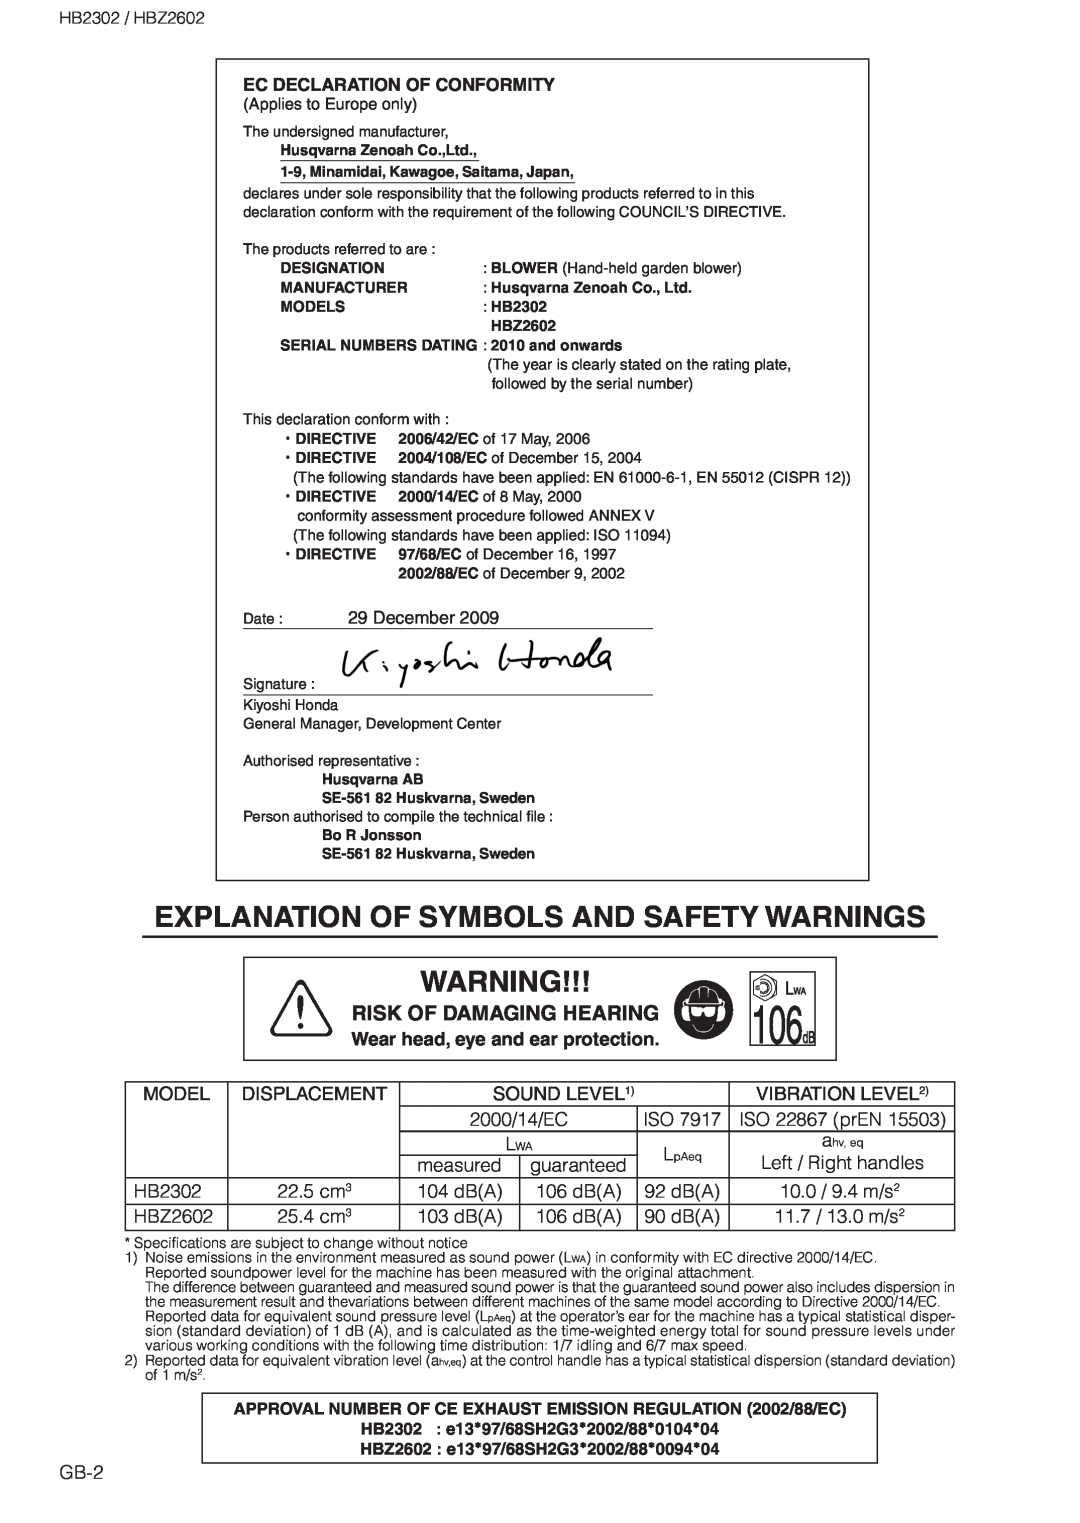 Zenoah HBZ2602 Wear head, eye and ear protection, Explanation Of Symbols And Safety Warnings, Risk Of Damaging Hearing 